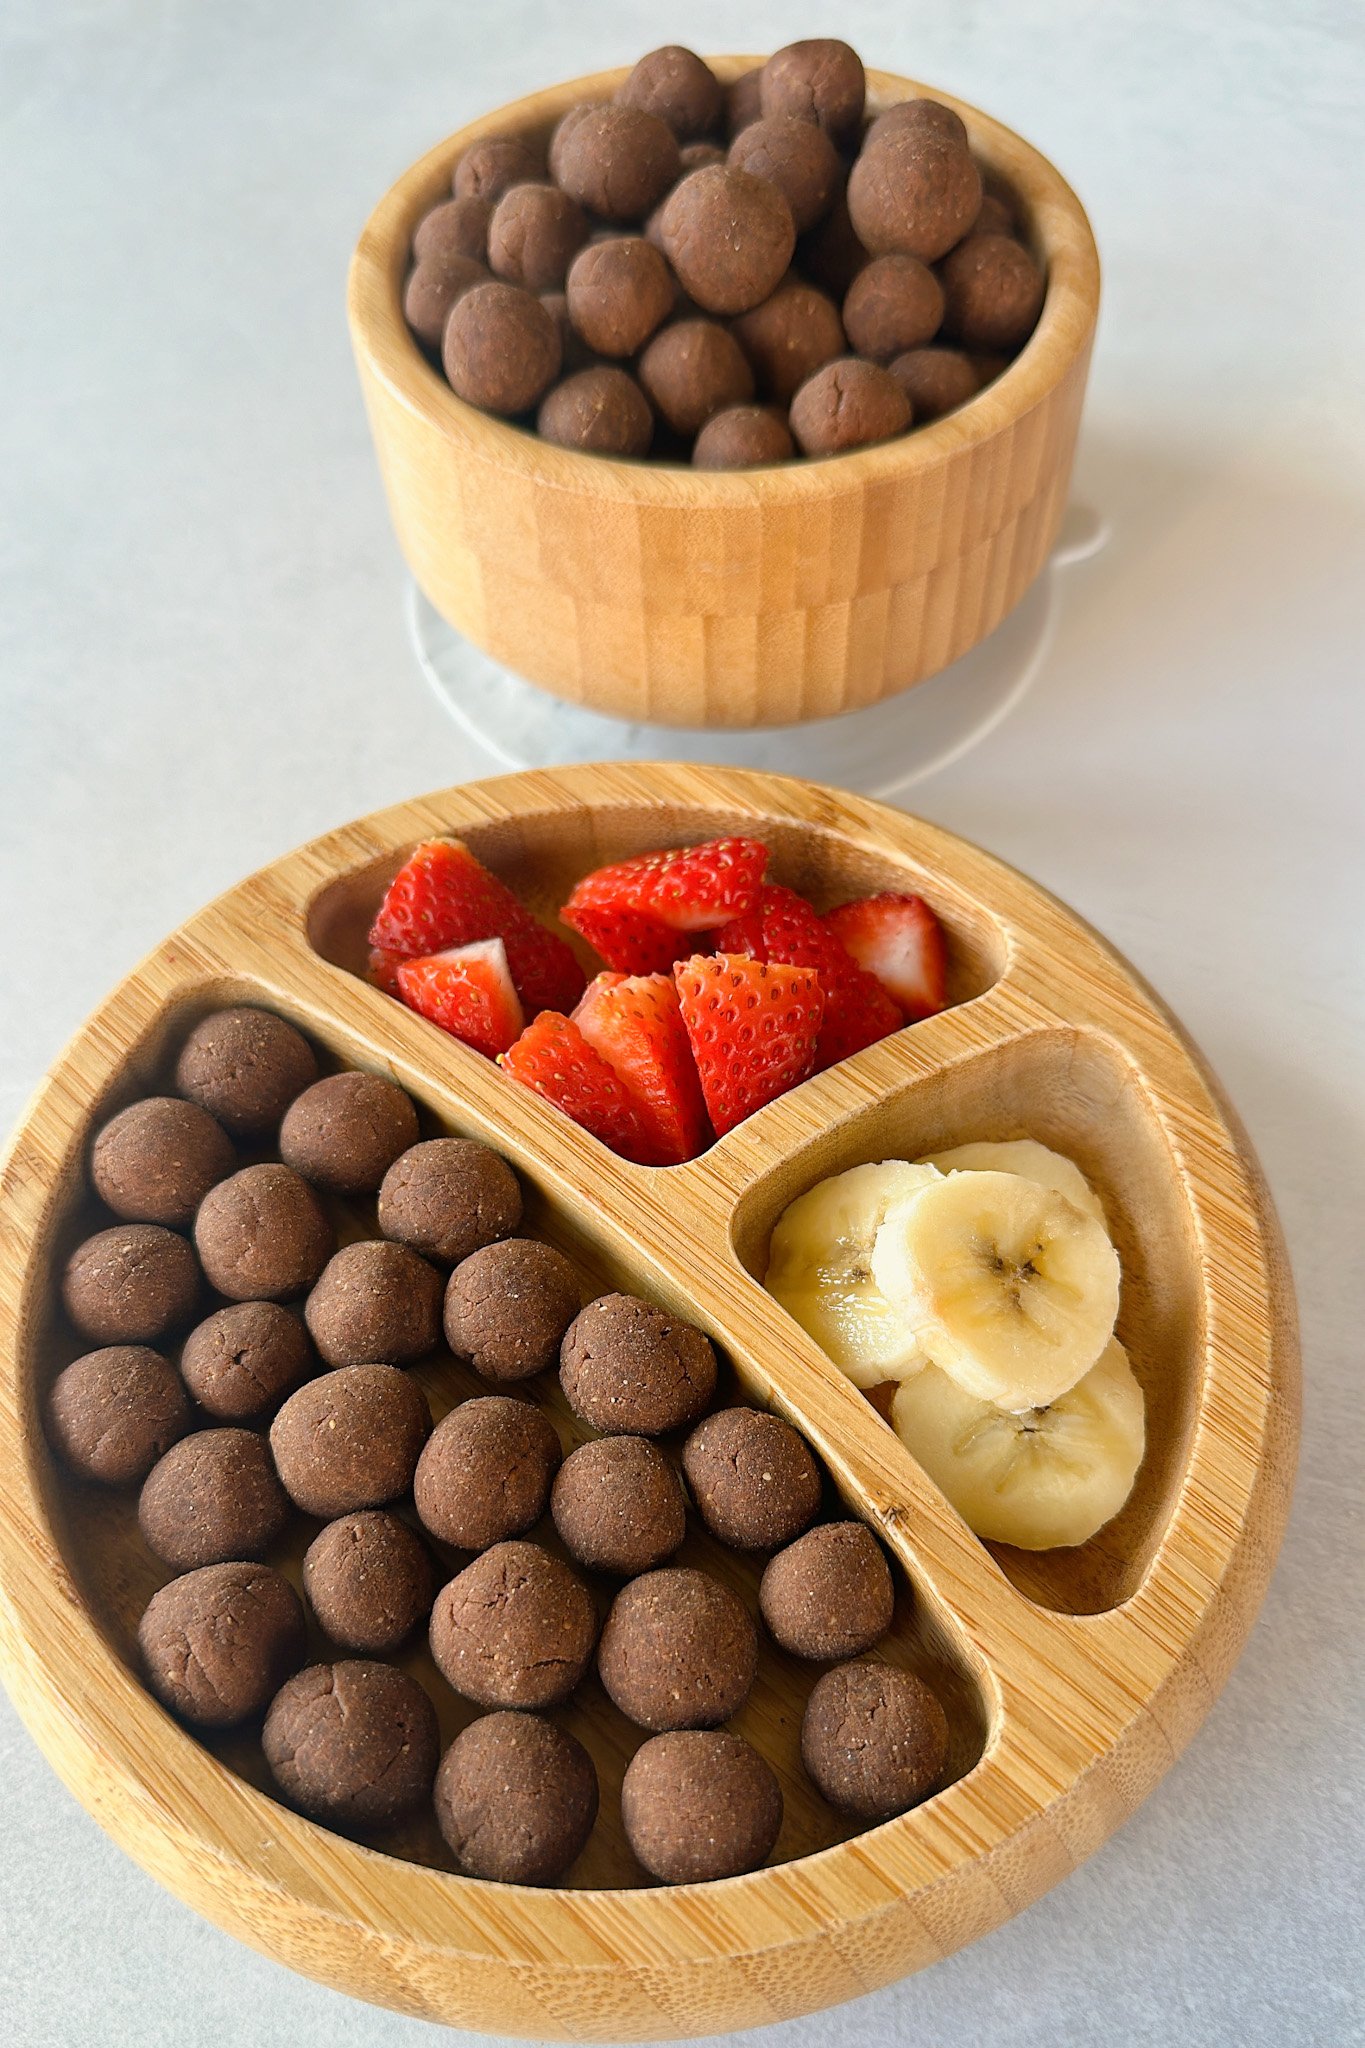 Cocoa puffs cereal served with strawberries and bananas.